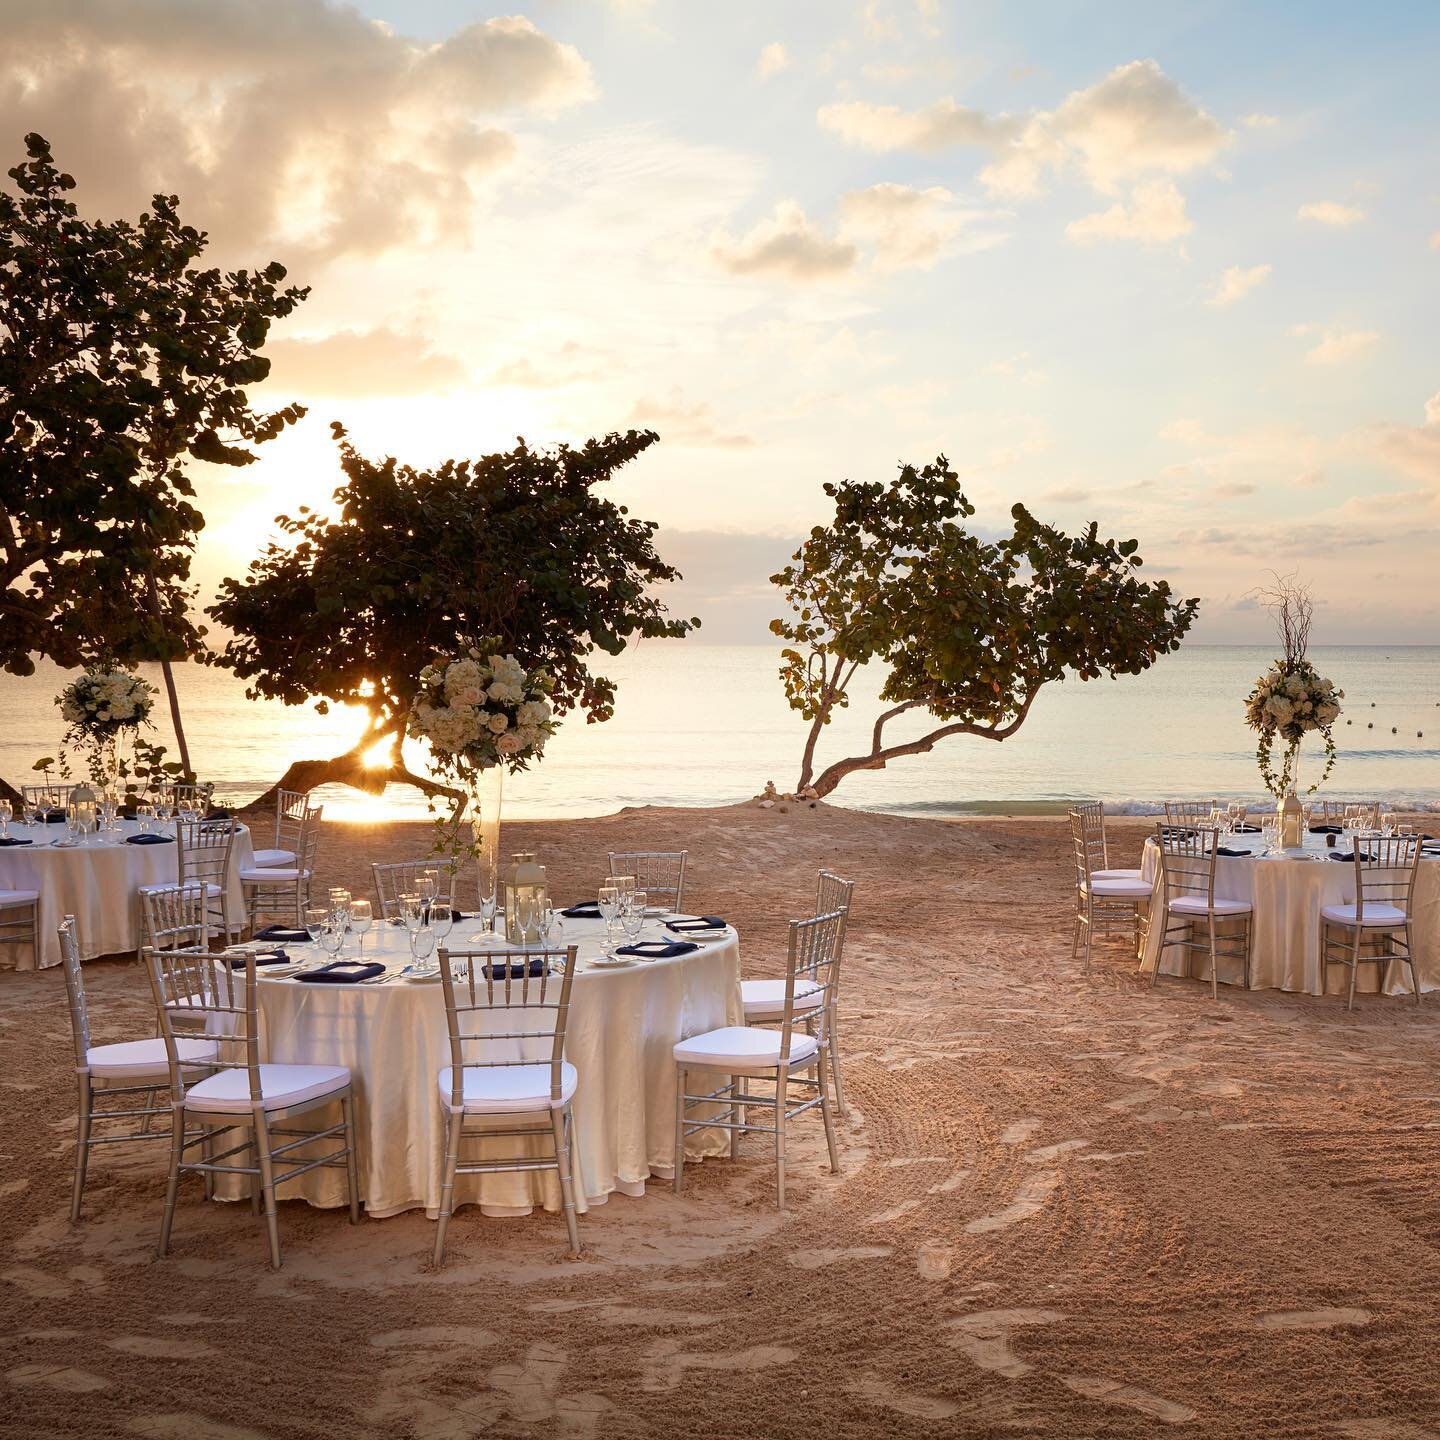 An unbelievable sunset for a lucky destination wedding couple and their guests at this low key reception dinner. This gorgeous set up is at Azul Beach Resort Negril, a gourmet all-inclusive resort by Karisma 🥰
.
.
.
.
.
.
.
.
#destinationwedding #ja